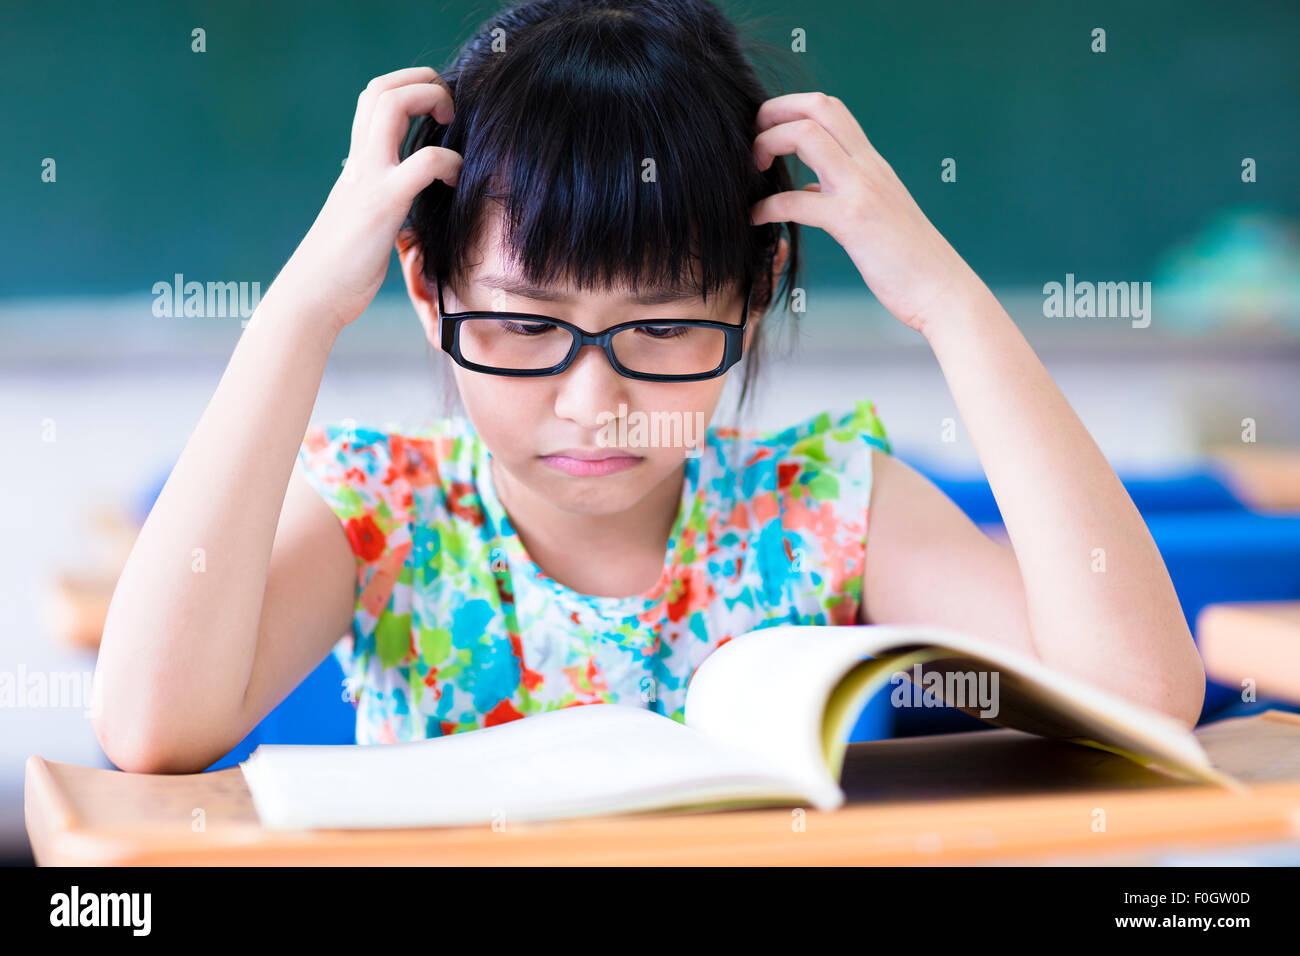 Depressed little girl studying in the classroom Stock Photo